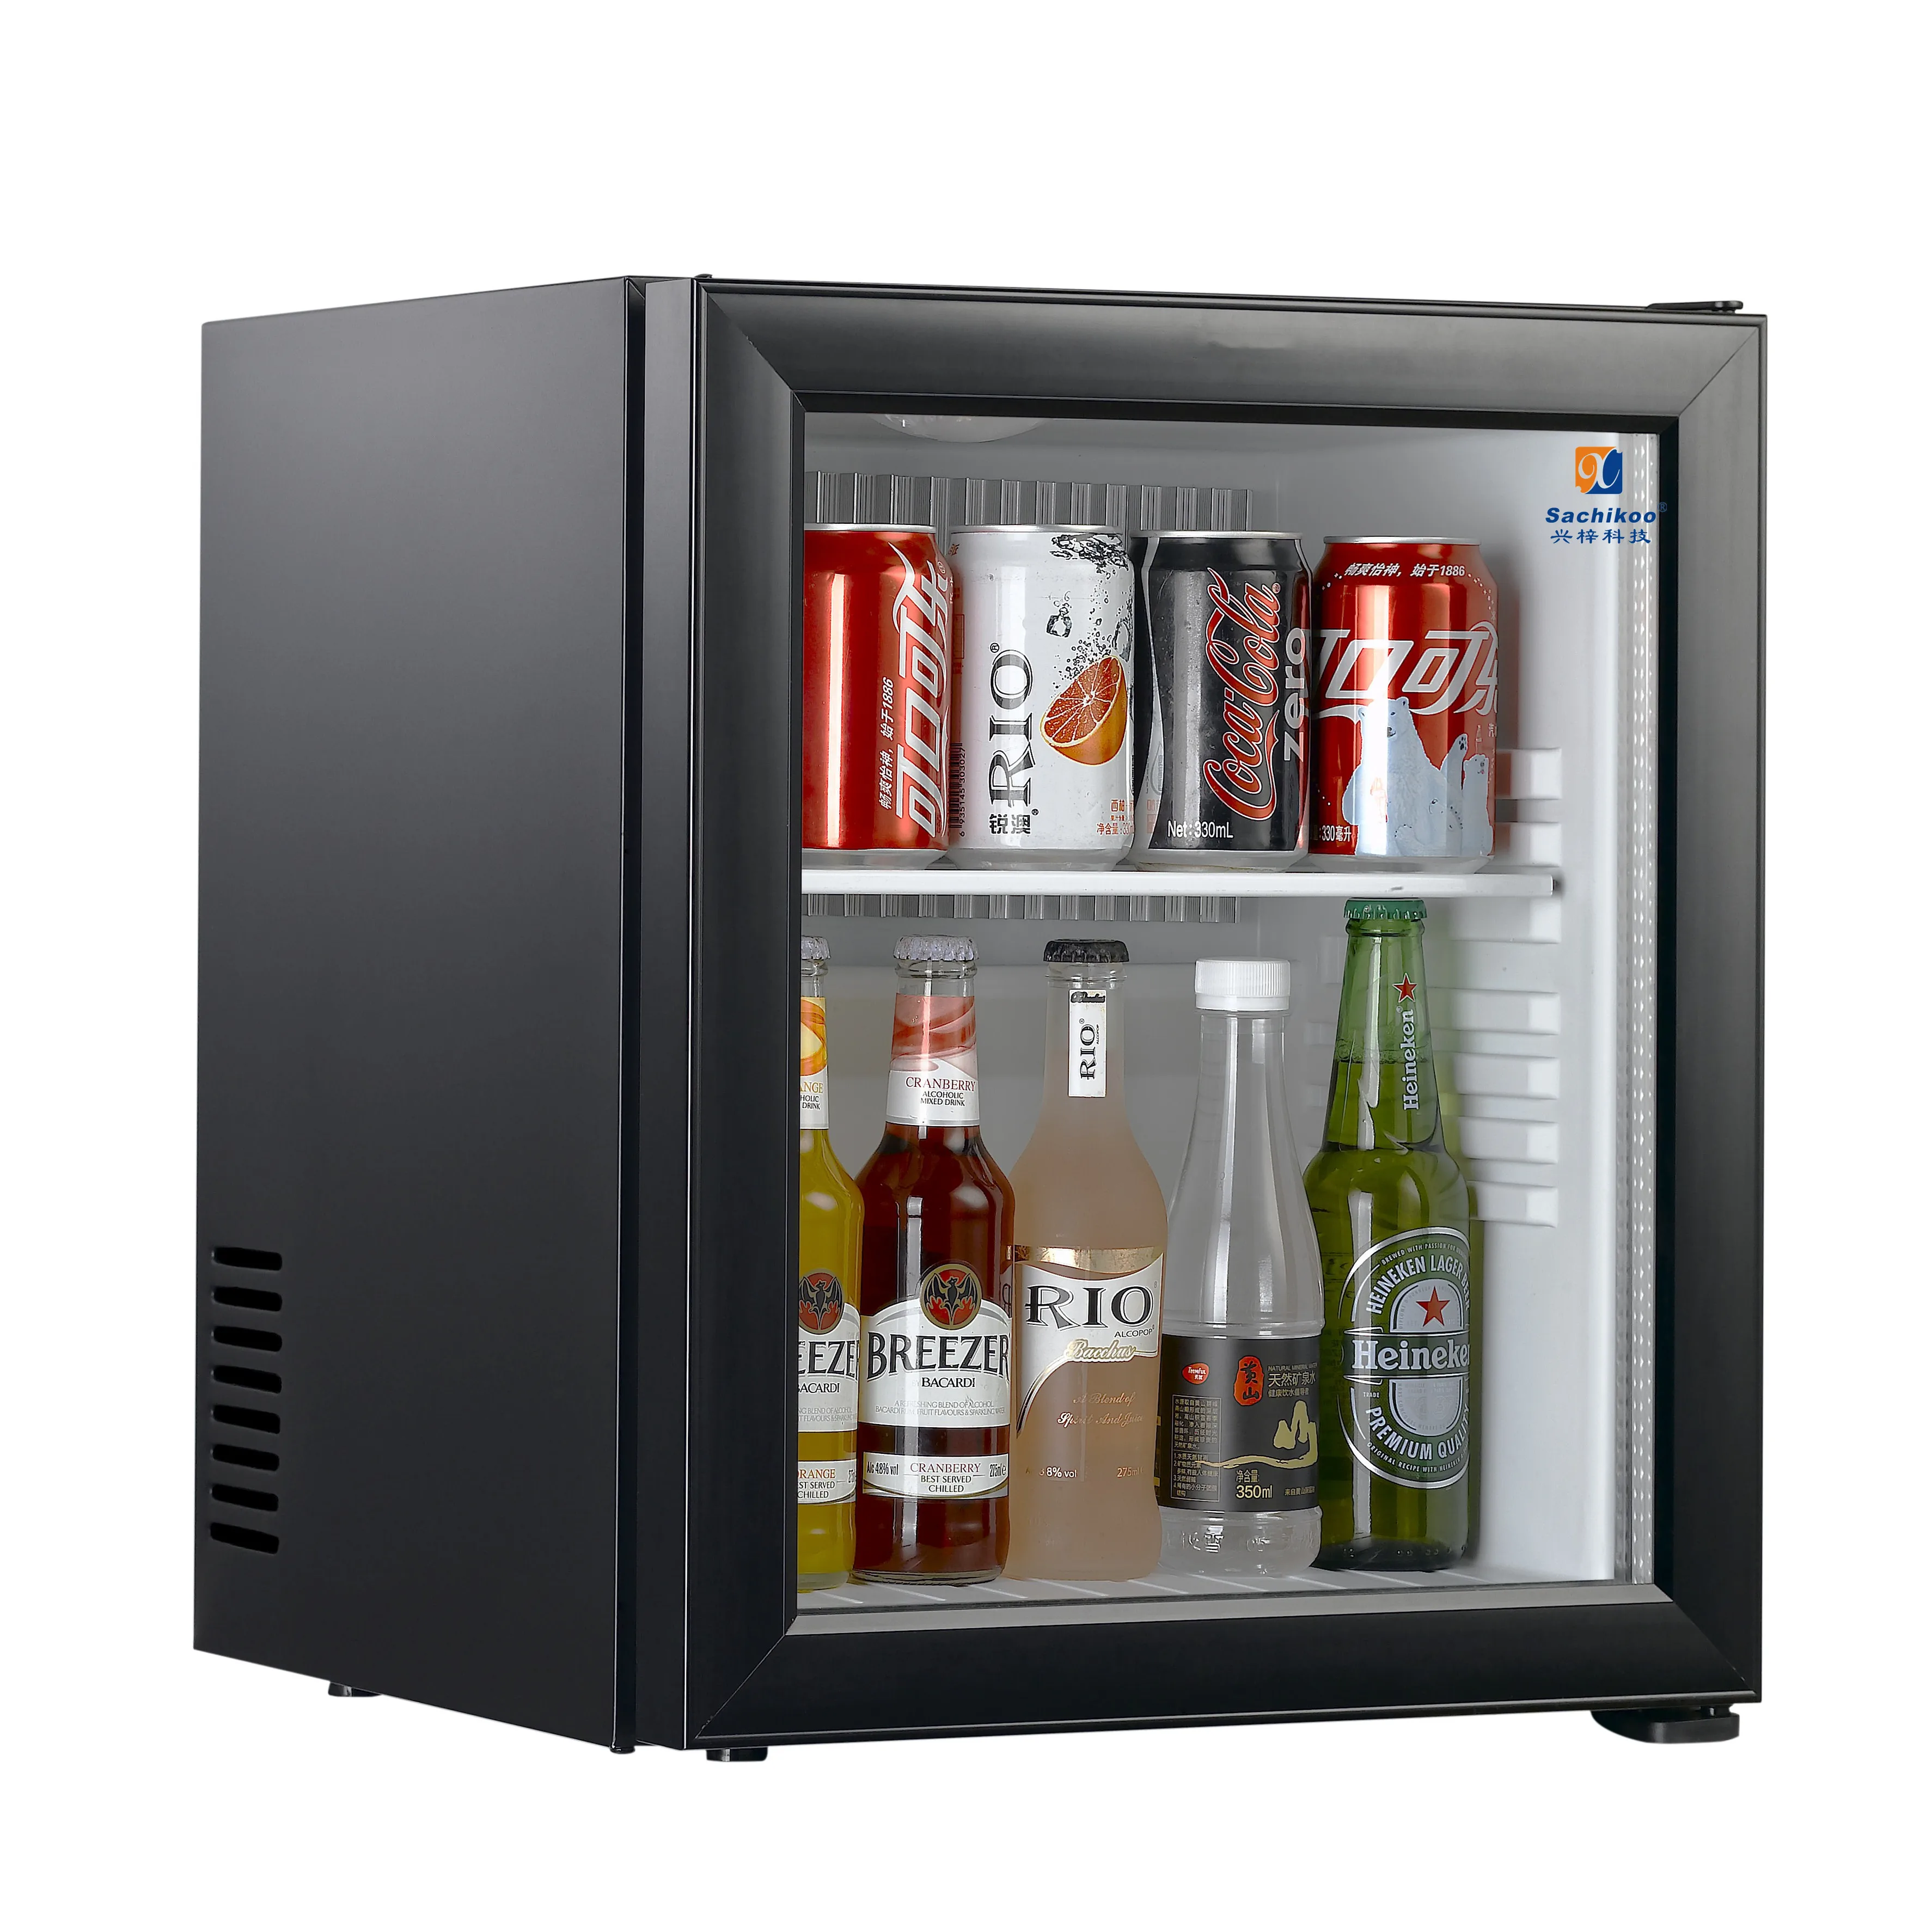 VINN DUNN ABSORPTION 25L Mini Fridge/Hotel Minibar/Table Top Cooler/Beer Fridge/Water Cooler/Wine Cooler for Kitchen Table/Office Table/Bedrooms Black Energy Class A++ Energy Class A++